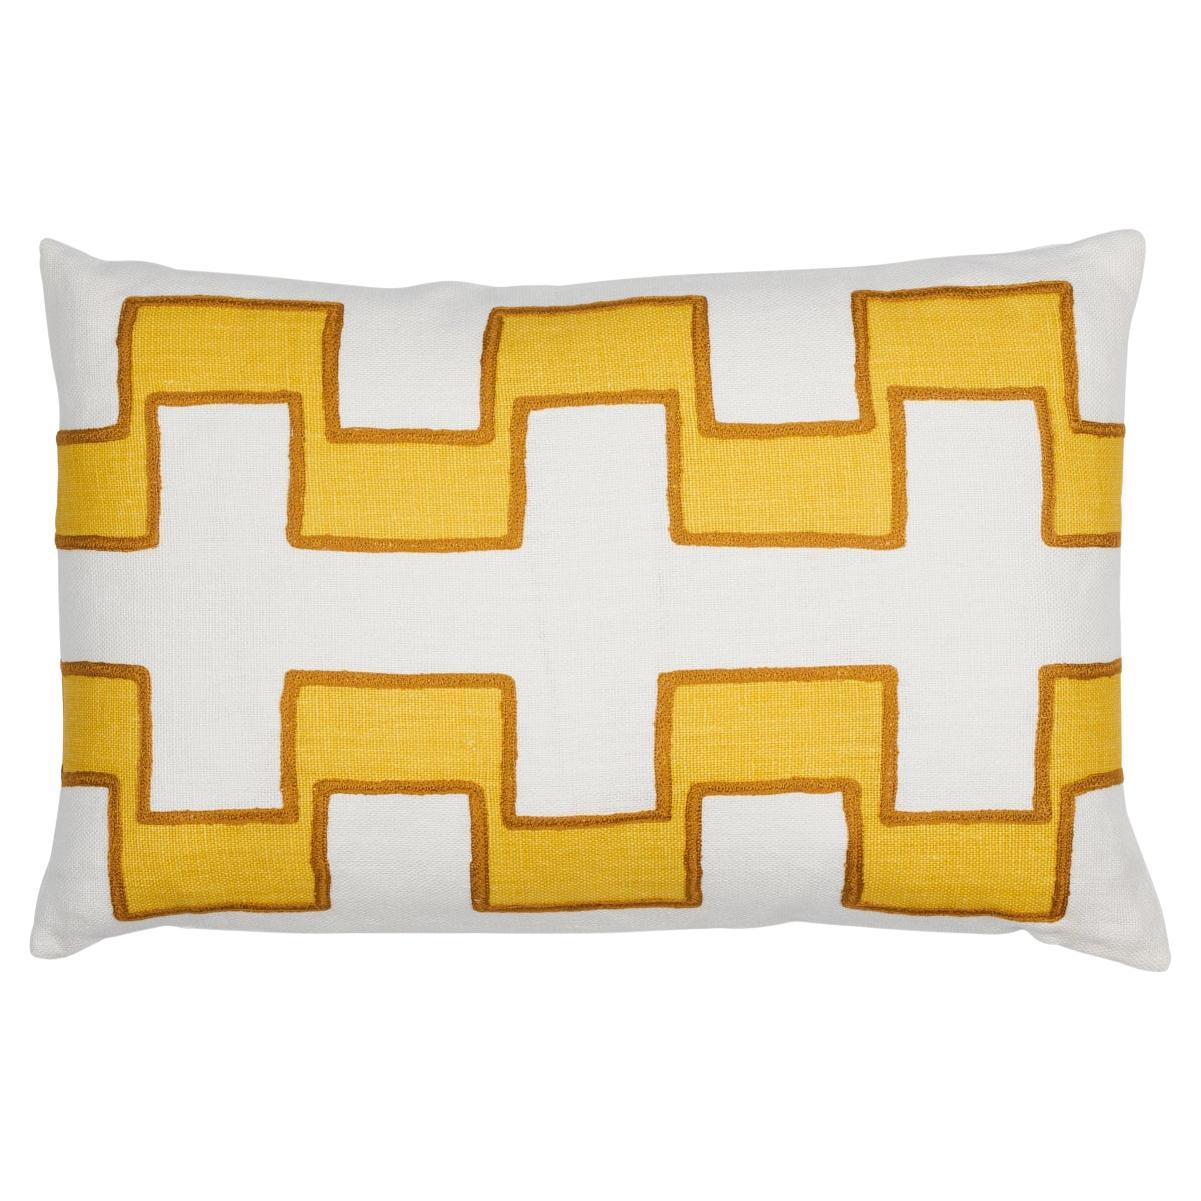 Shumacher Dixon Embroidered Print 25x16" Pillow in Yellow